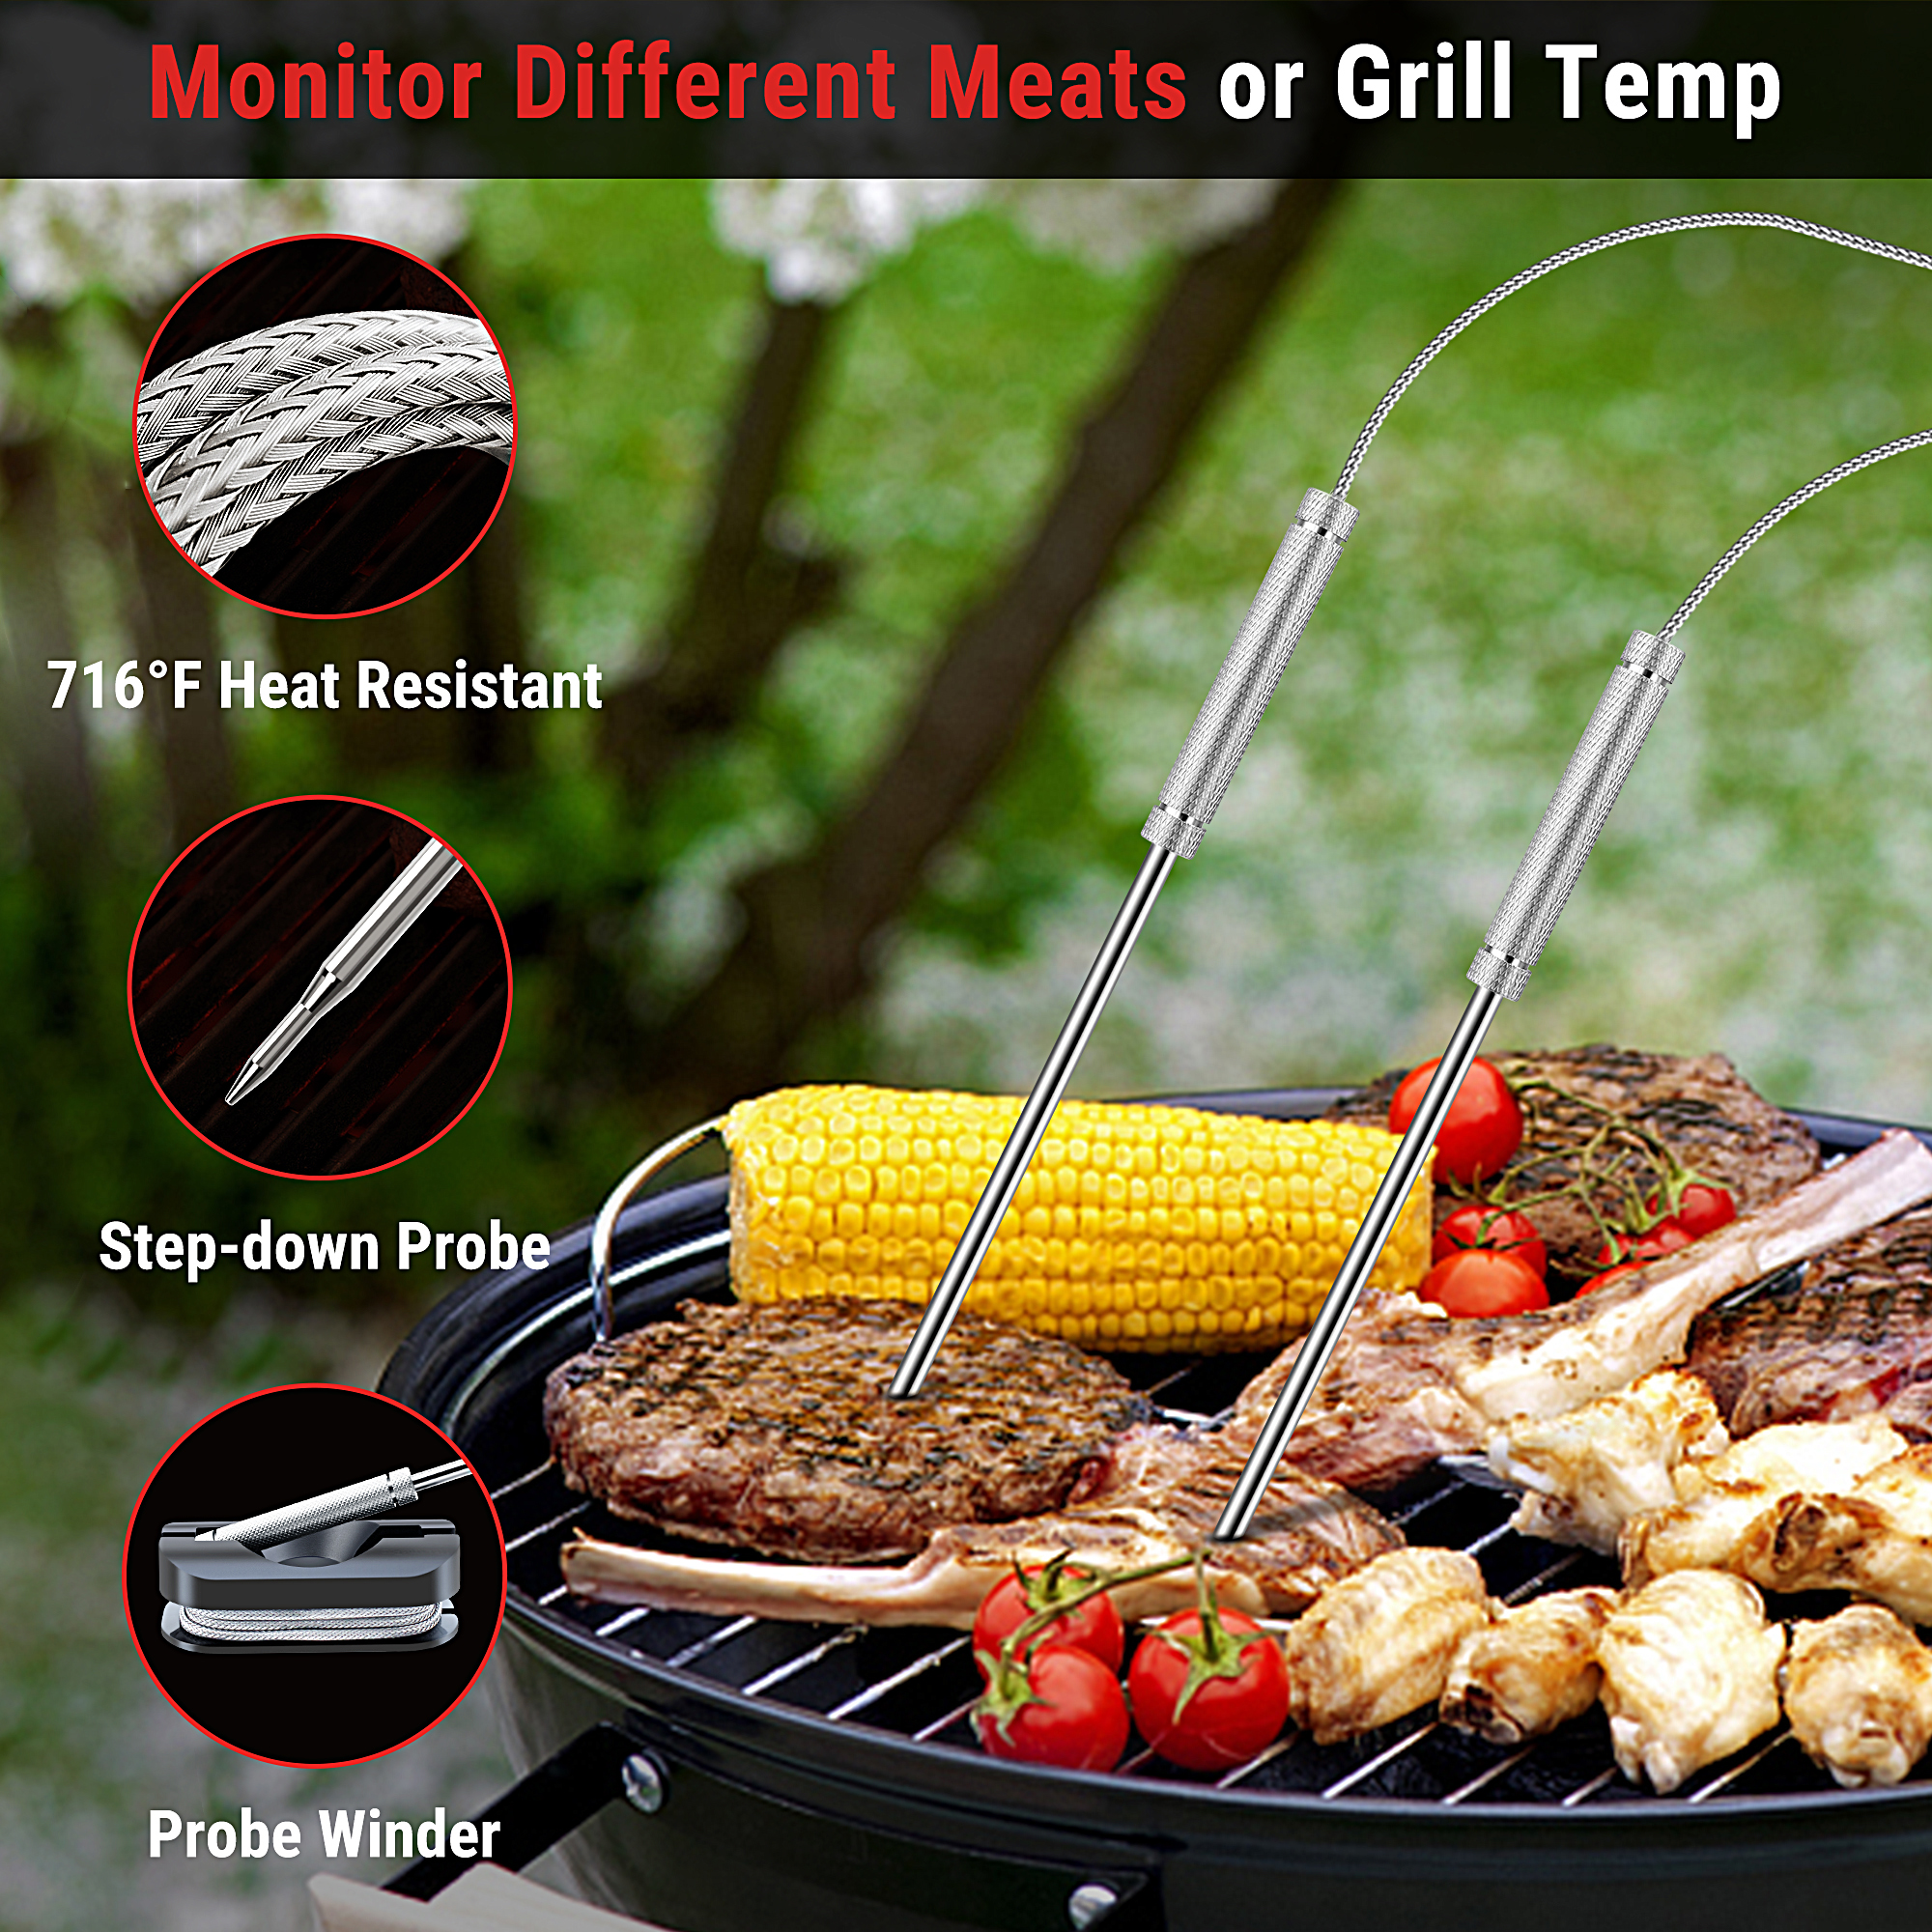 ThermoPro's backlit digital meat thermometer down at $14